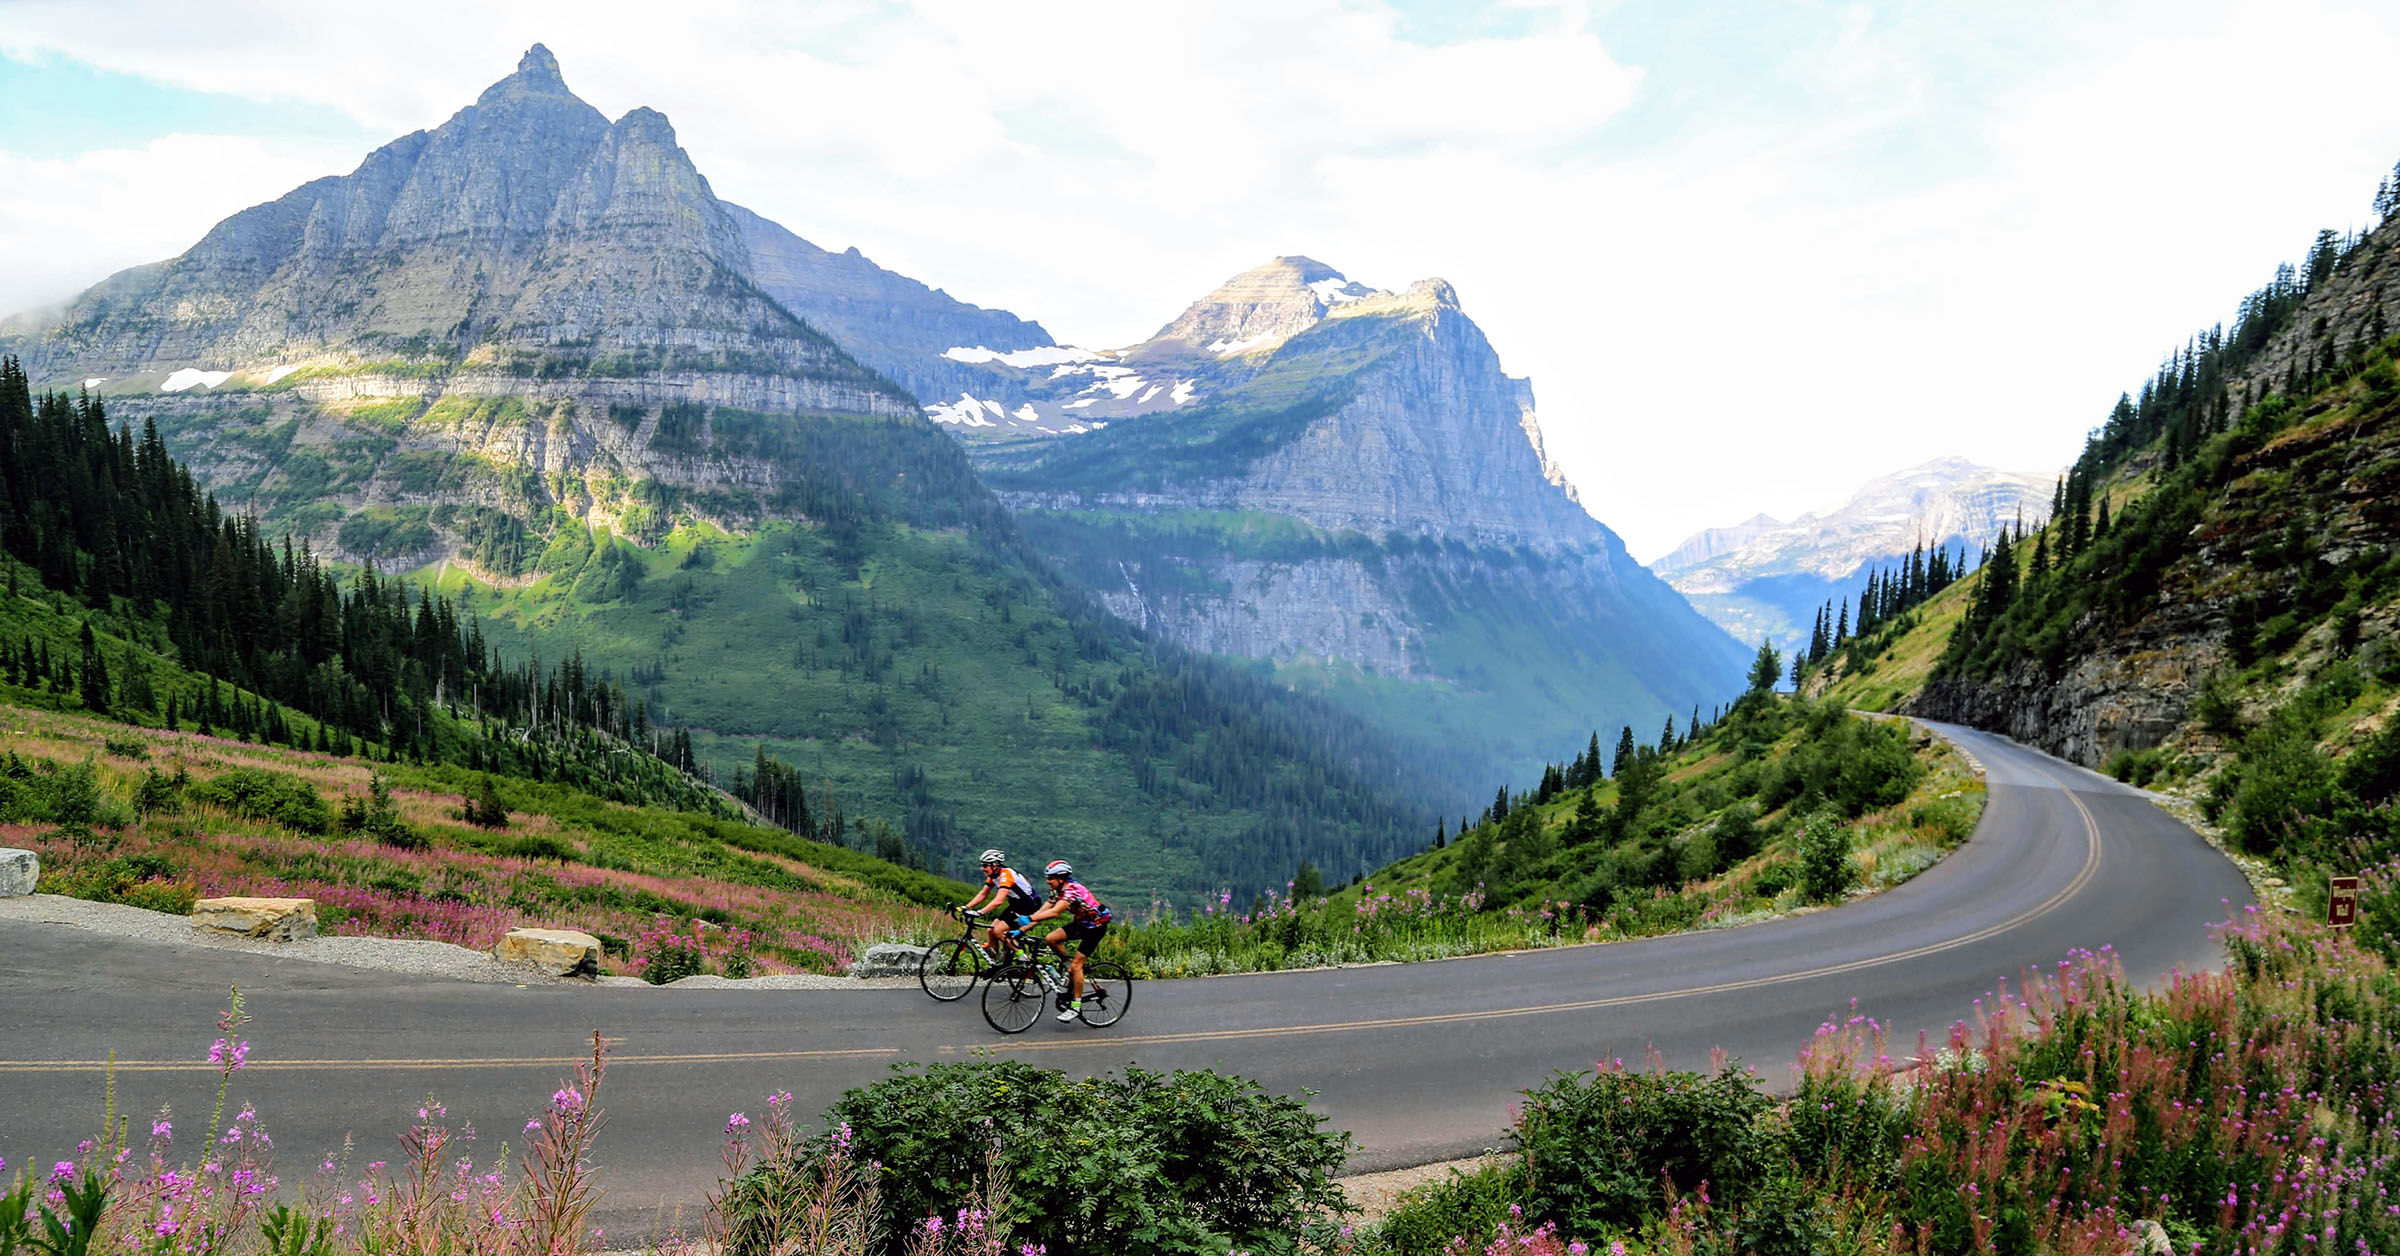 Cycling the last best place. Glacier National Park. Whitefish, Montana.